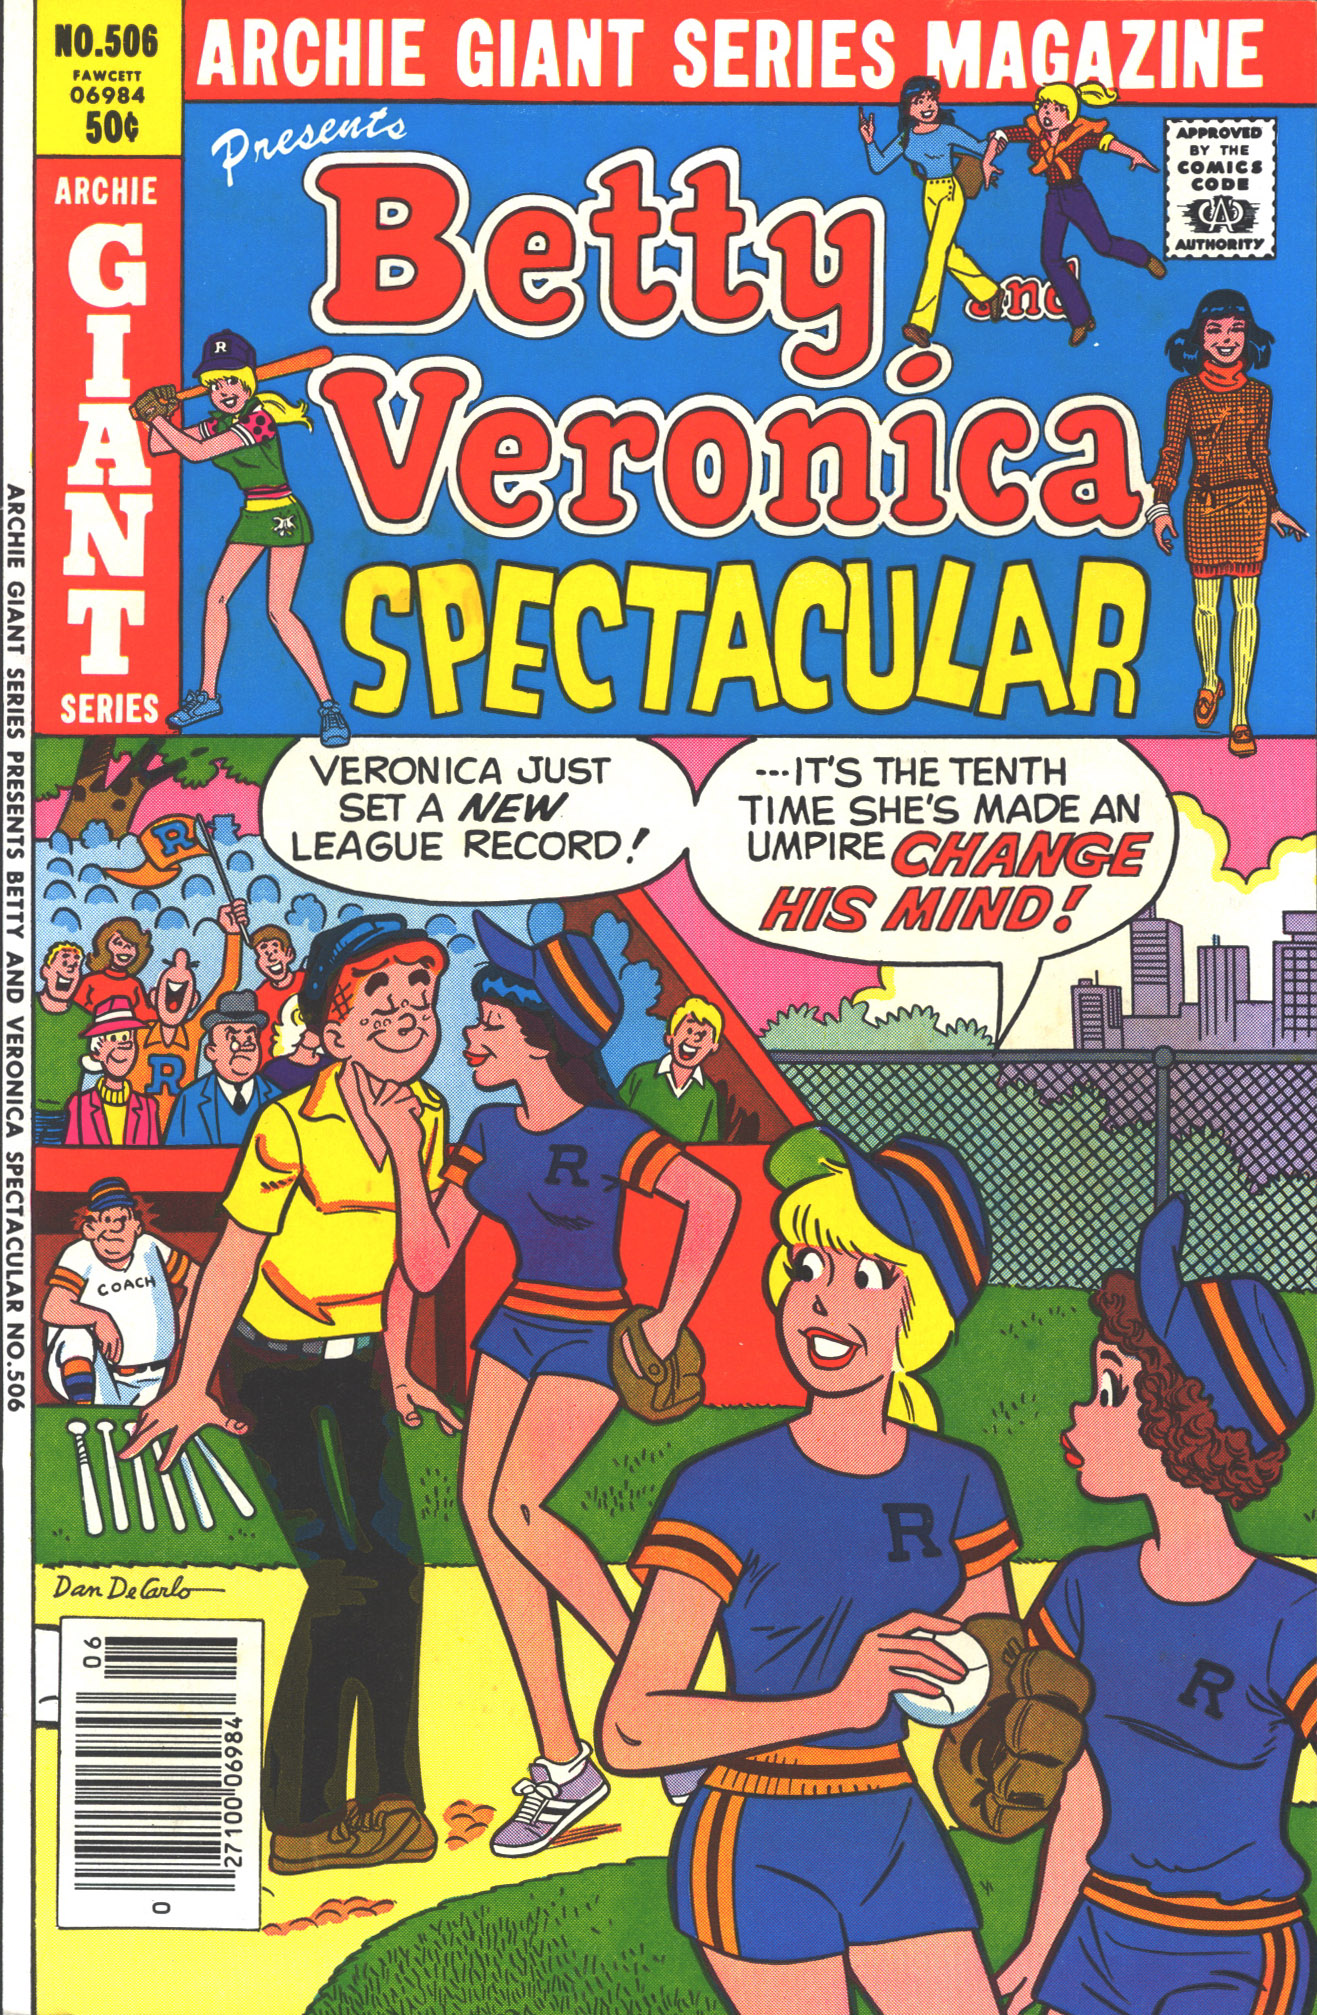 Read online Archie Giant Series Magazine comic -  Issue #506 - 1